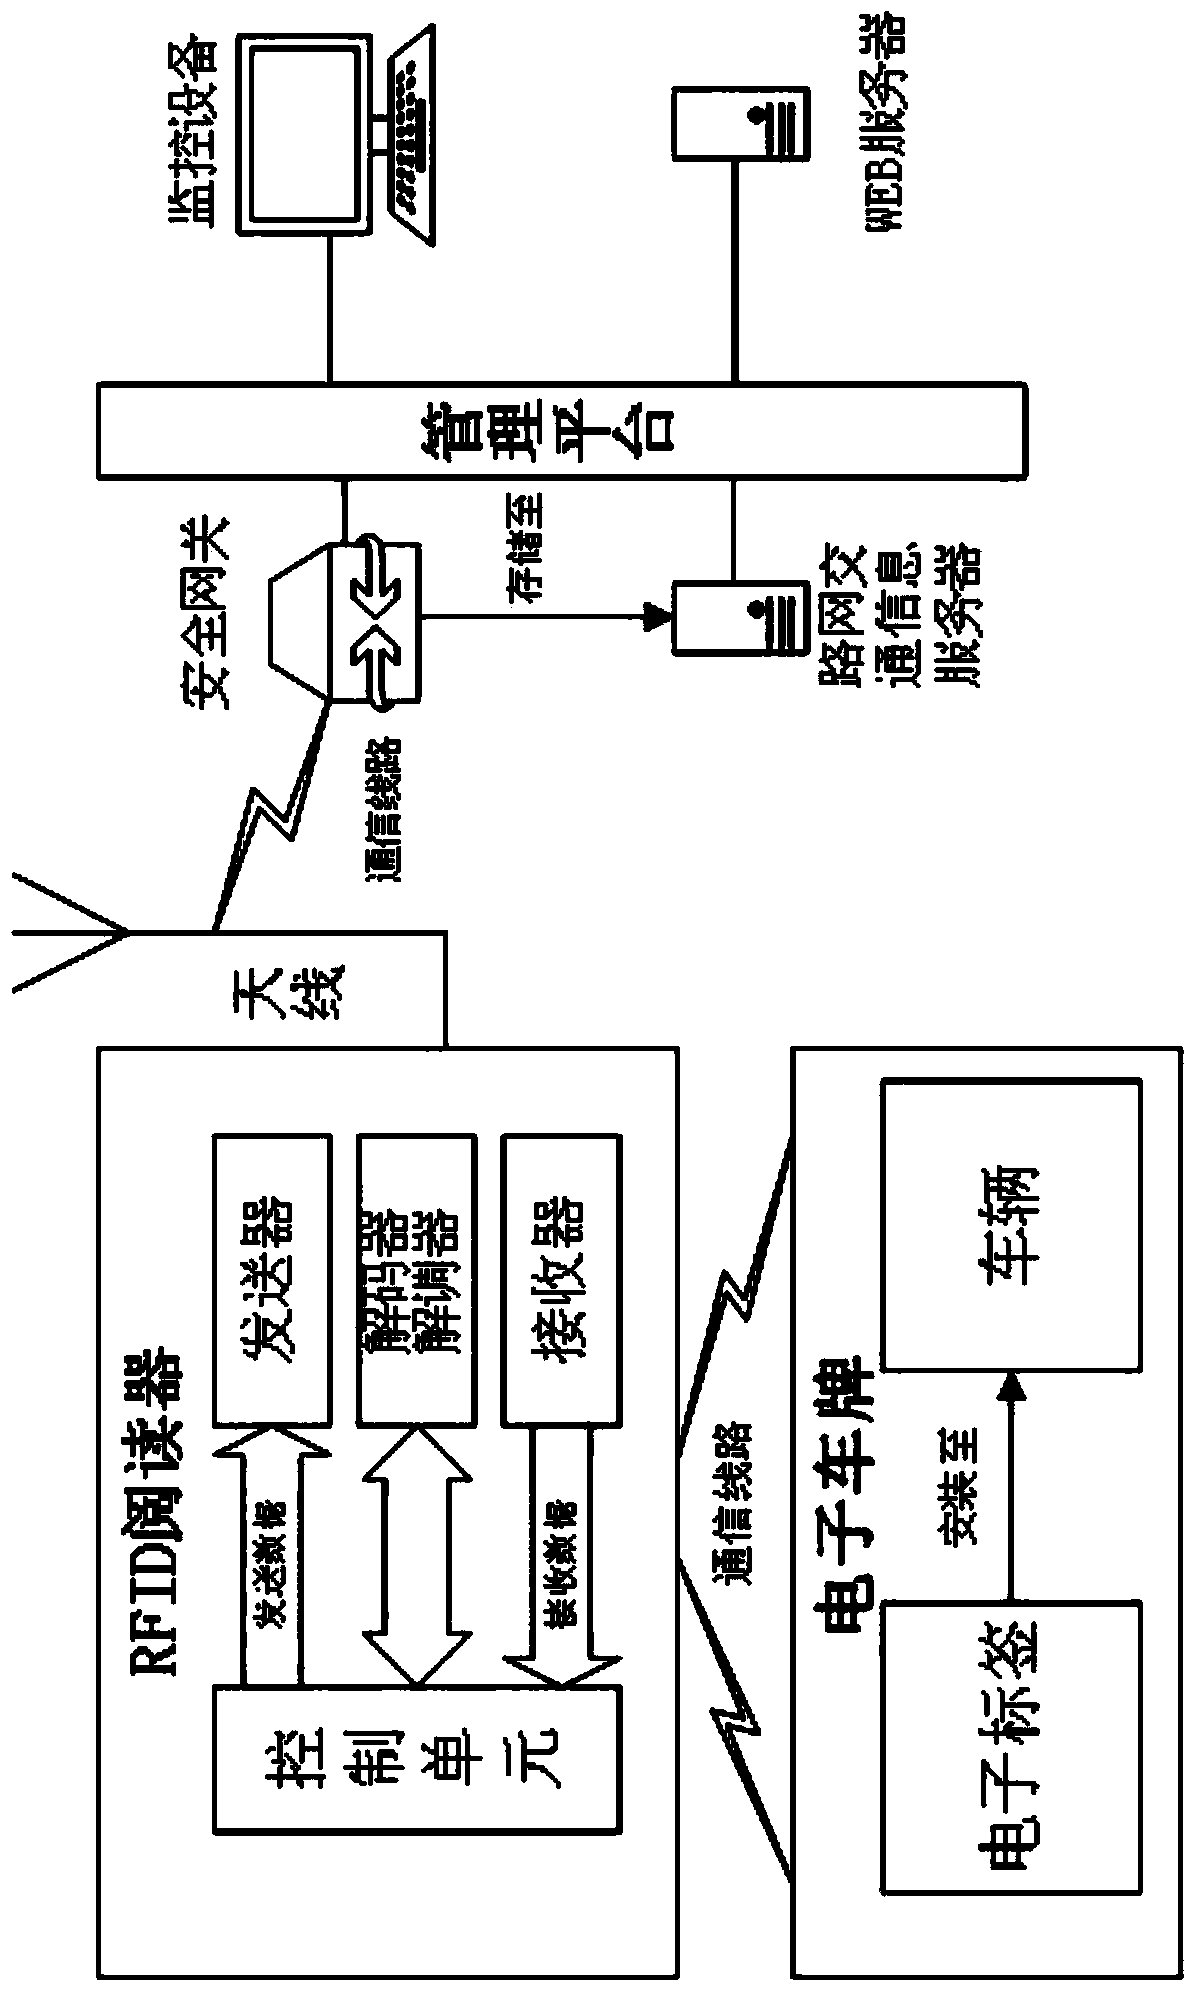 Vehicle peccancy monitoring and tracking positioning system of applying electronic license plate